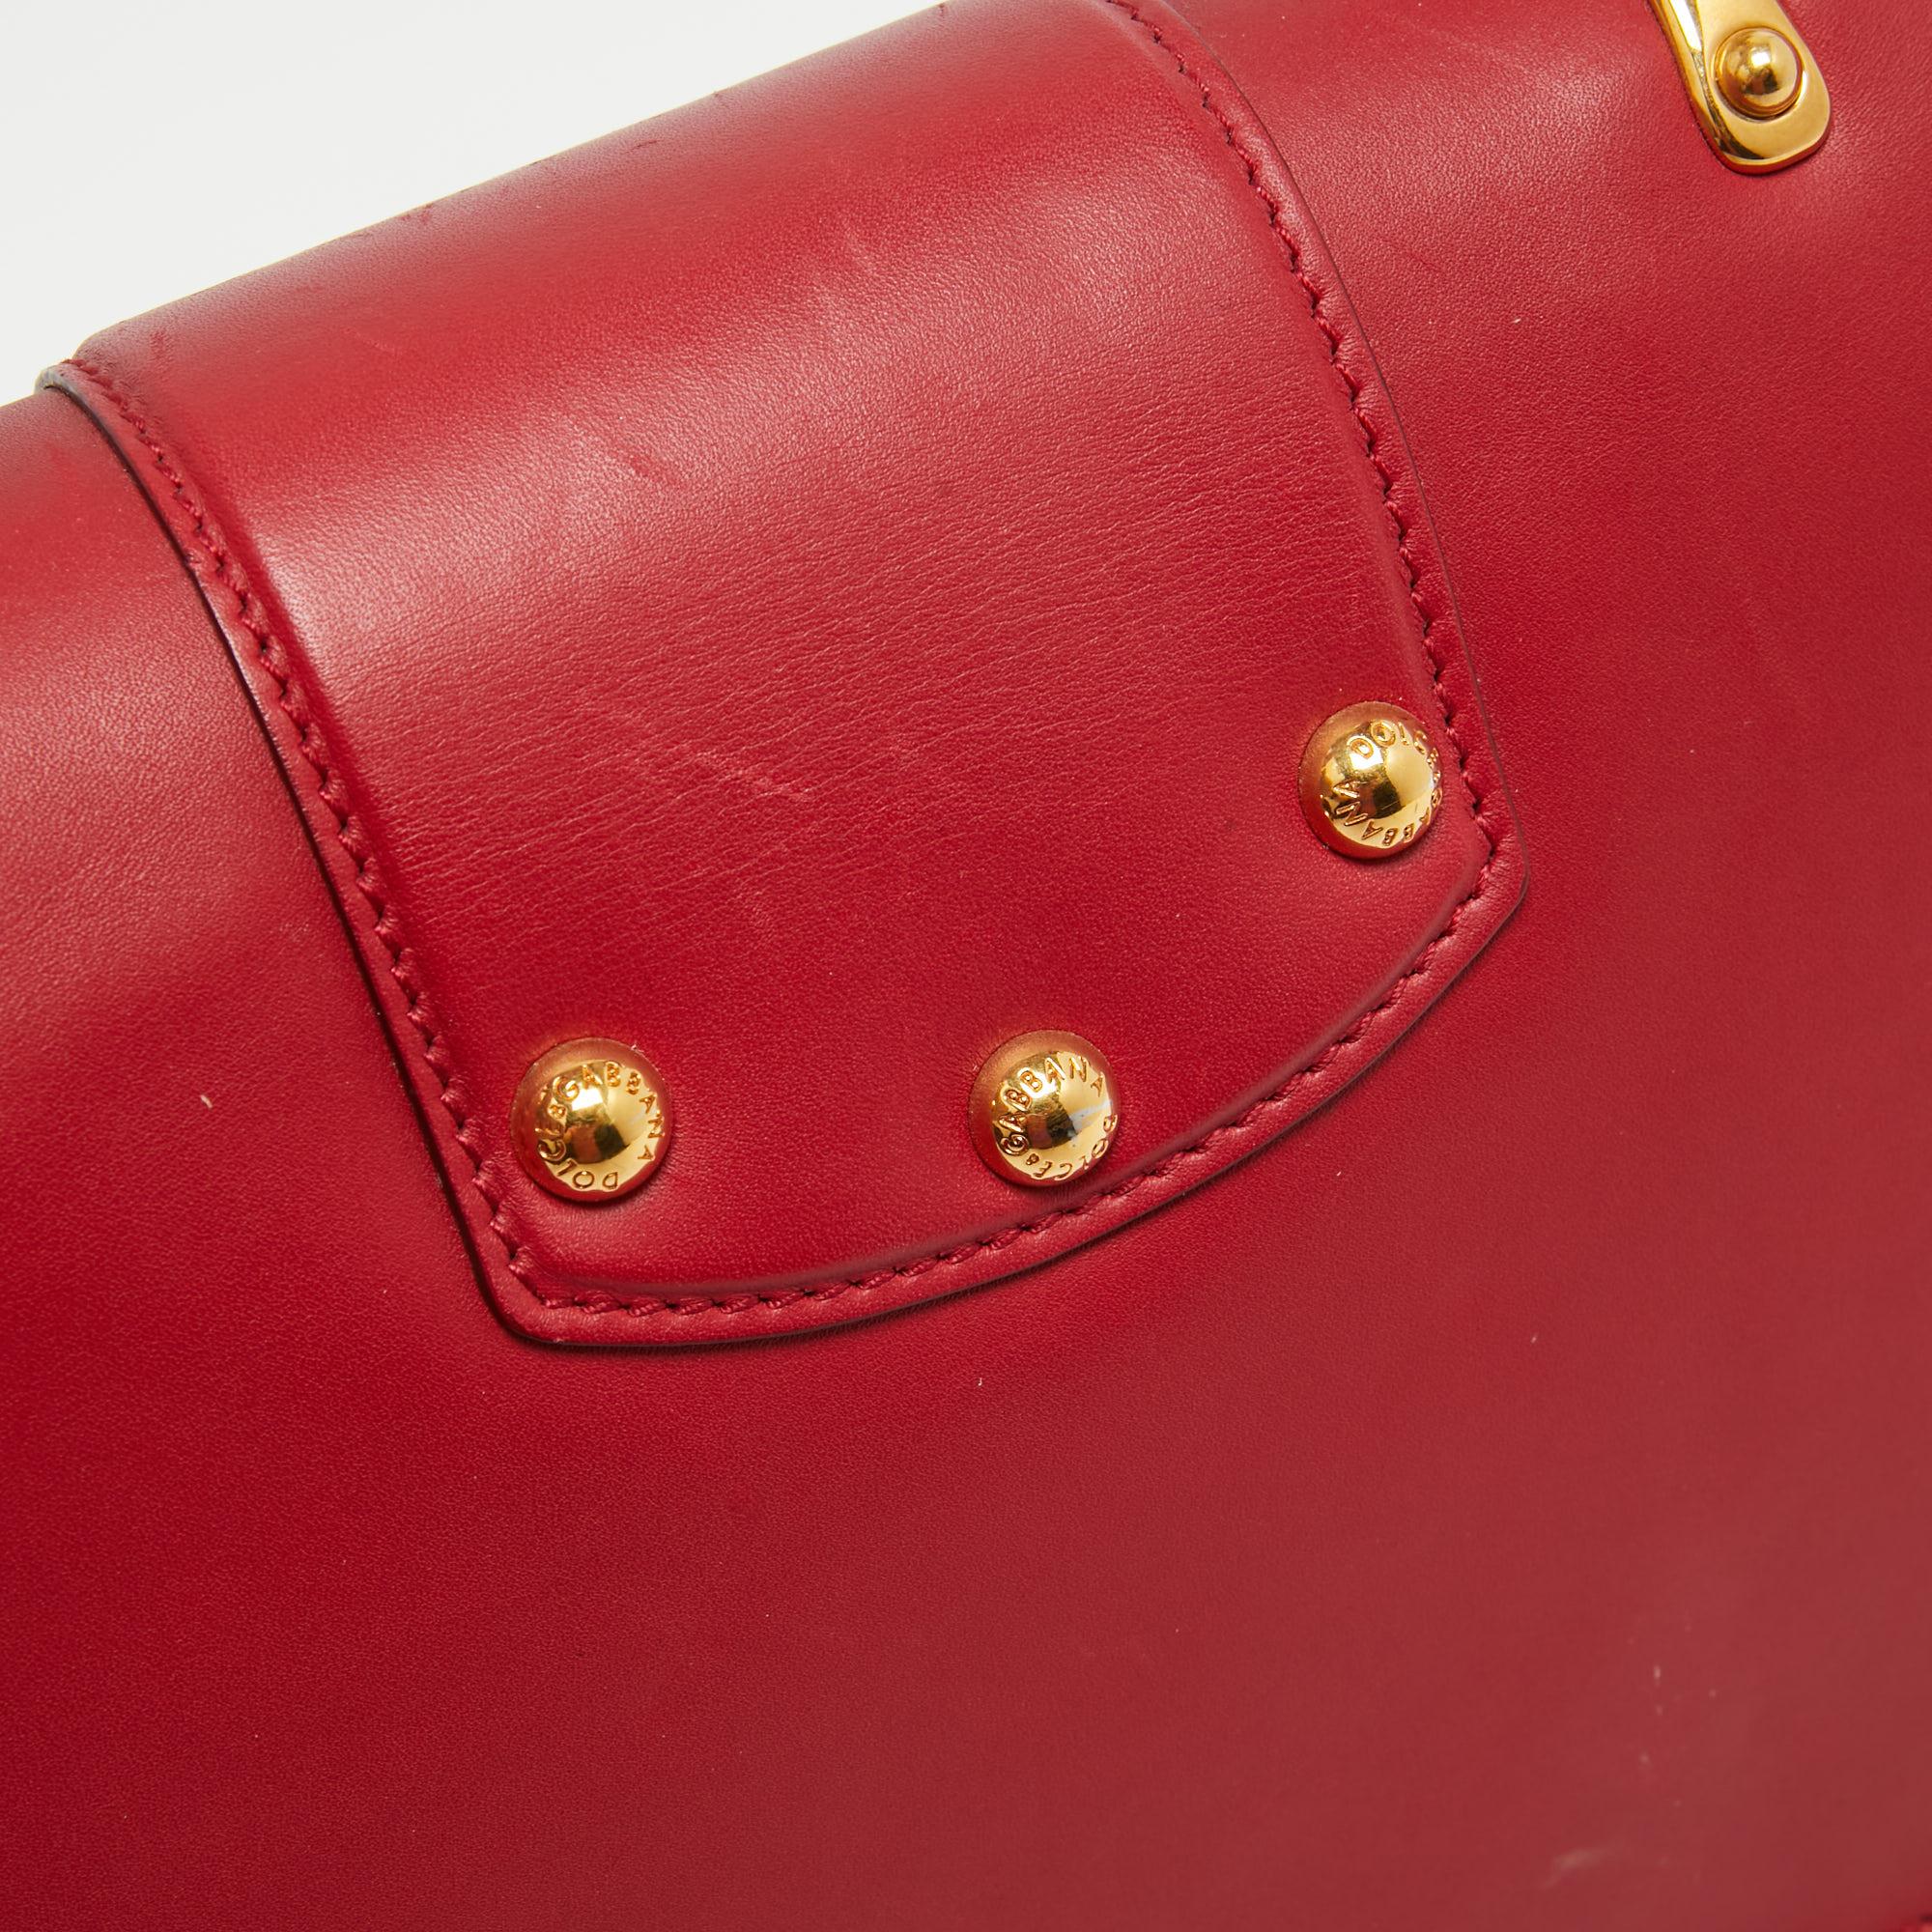 Dolce & Gabbana Red Leather DG Amore Top Handle Bag For Sale 7